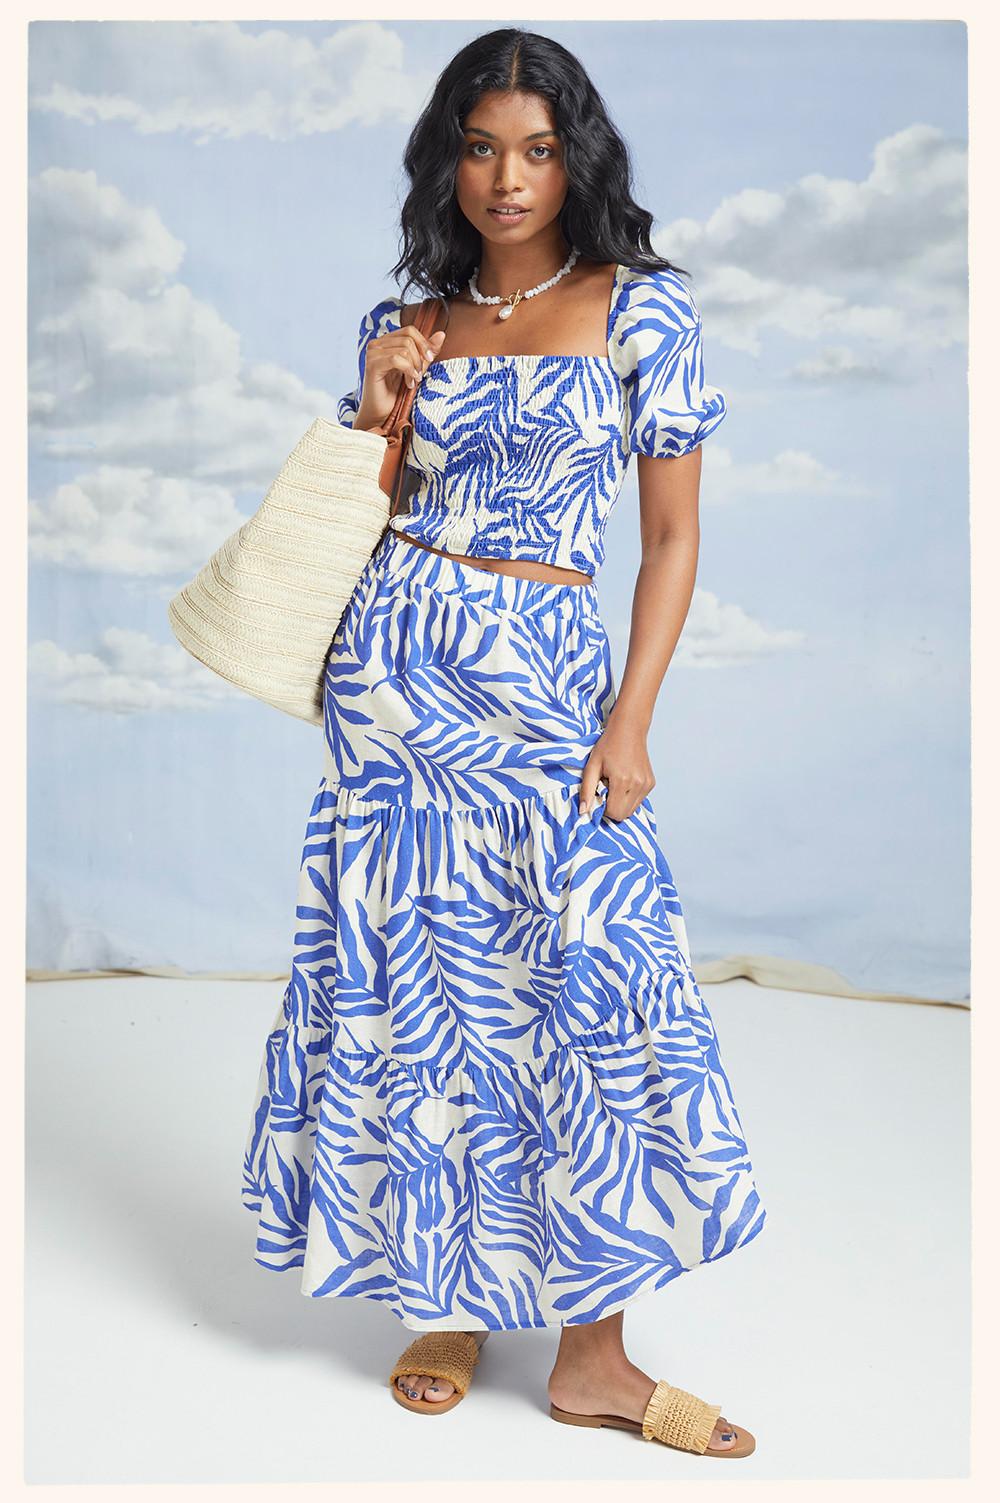 Model wears blue and white printed co-ord